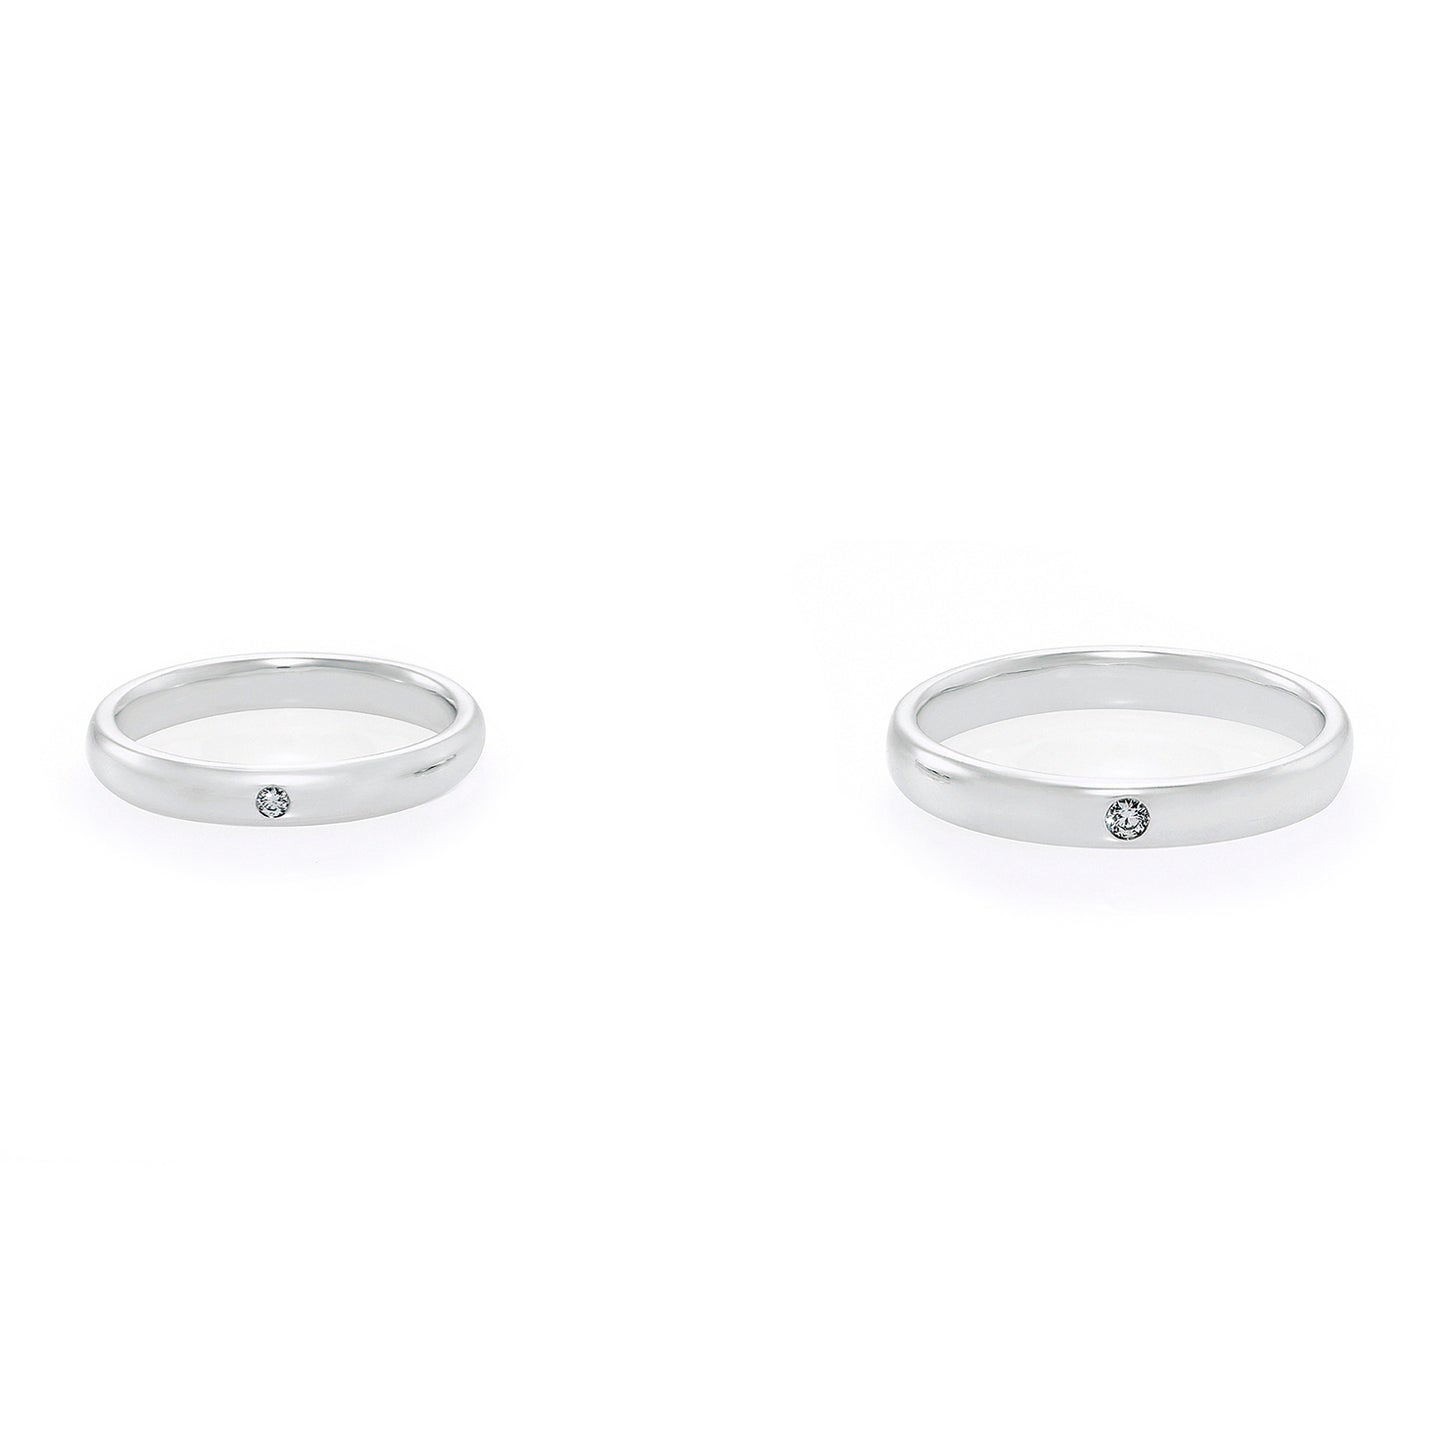 Diamond Wedding Couple Rings in White Gold - HN JEWELRY